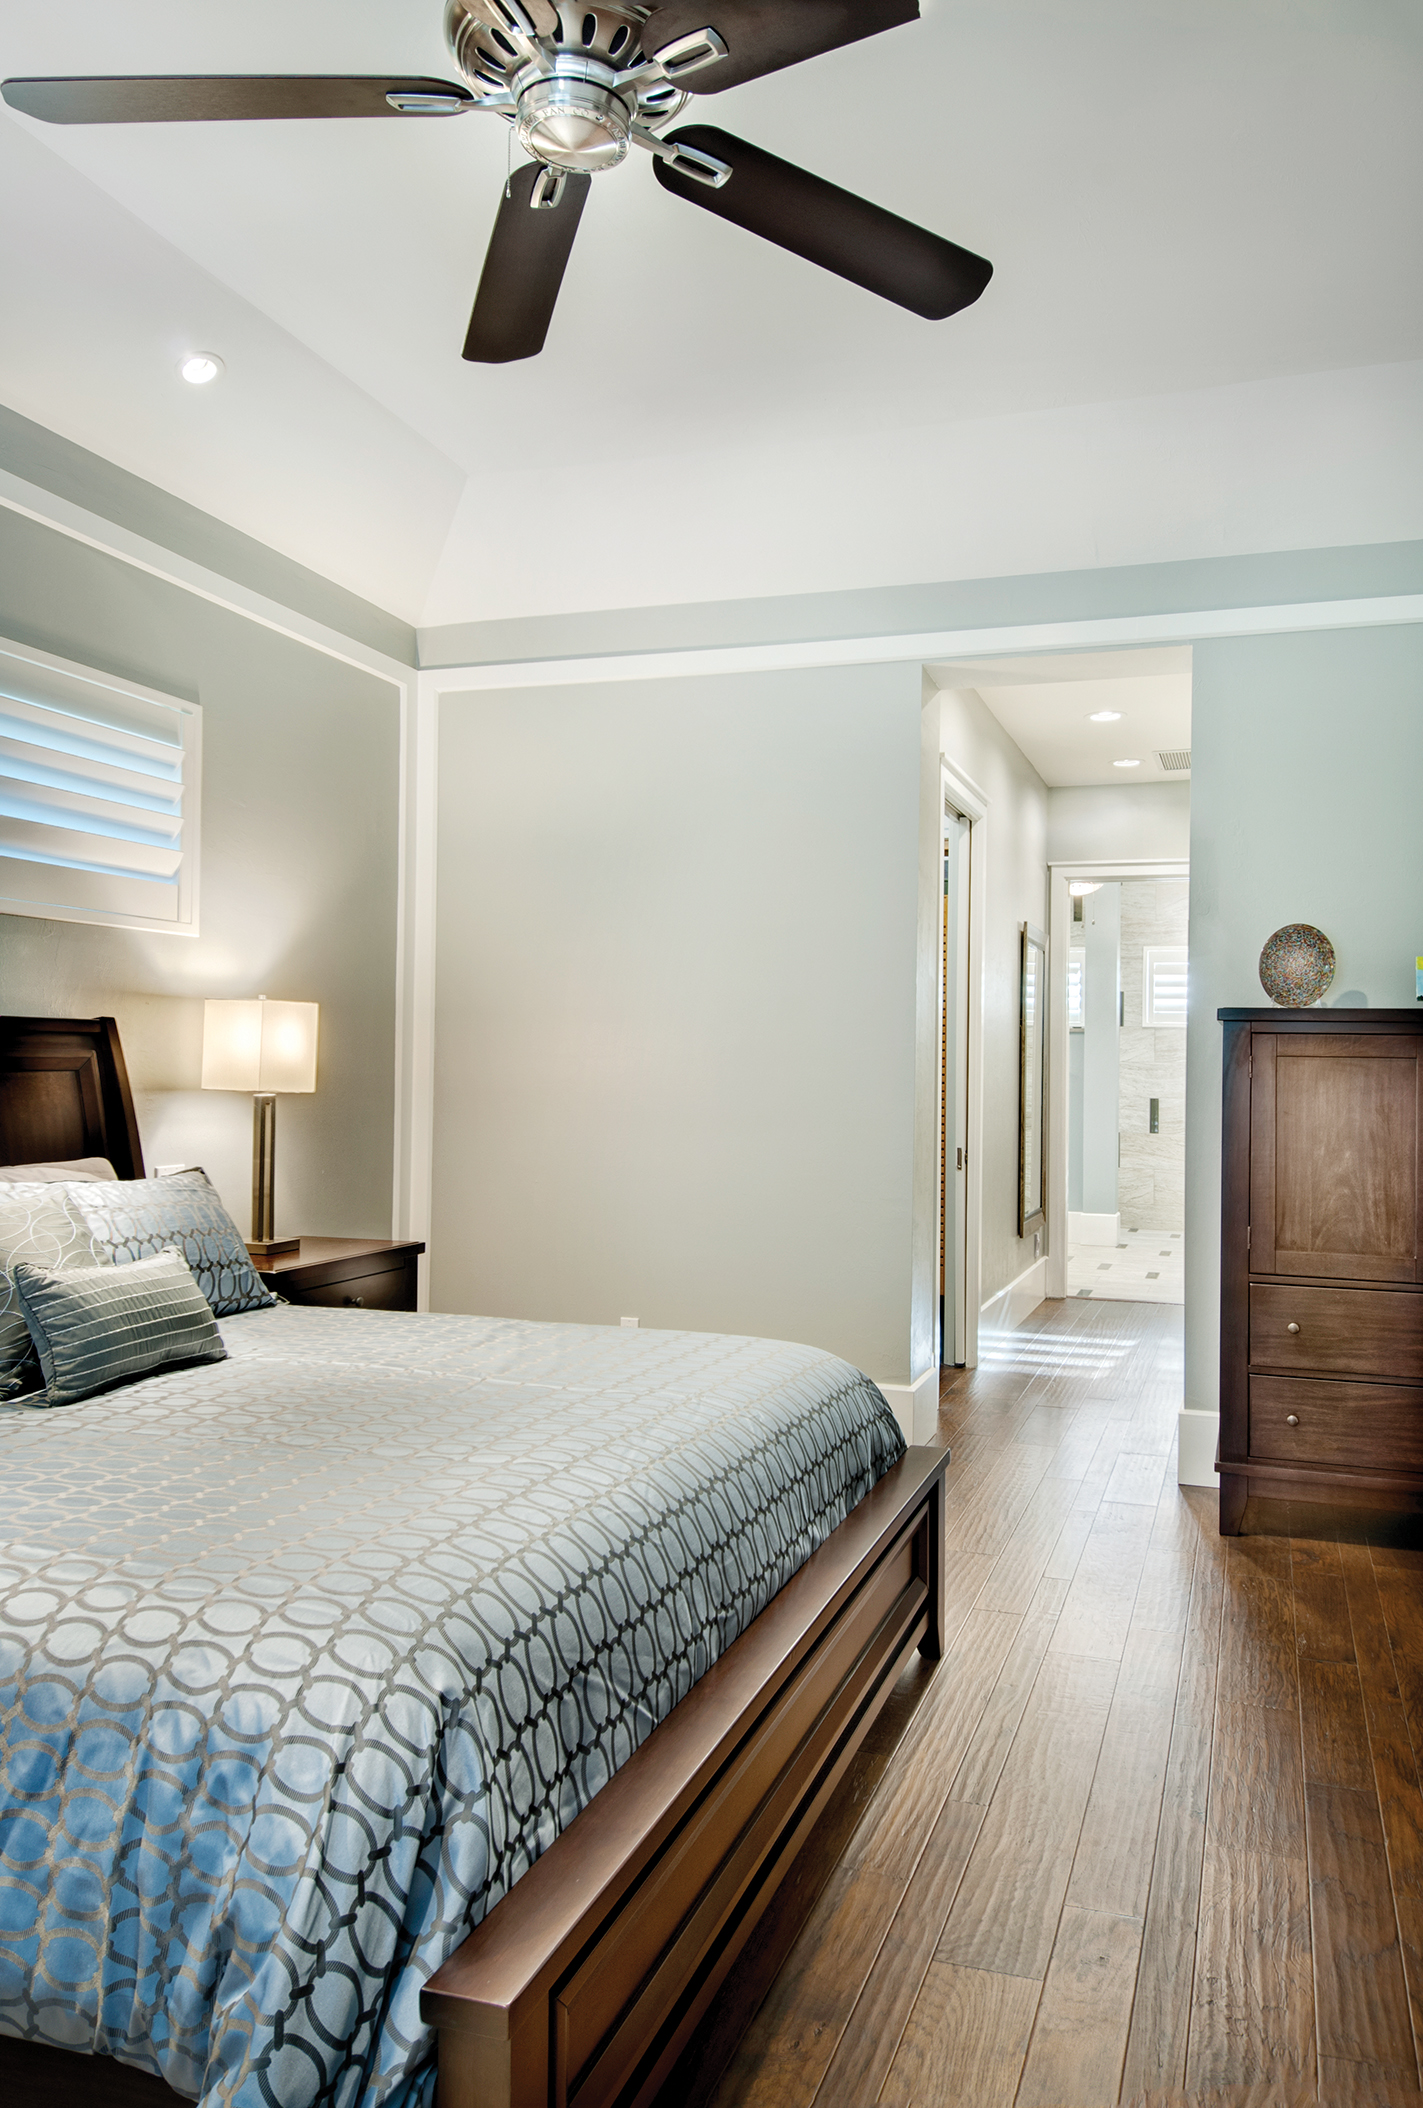  The master suite is tranquil with shades of soft blue. “We wanted to keep this room simple and comfortable,” says Sater. Through the hall, the master bath sports more of the beautifully stained woods found throughout the home. 